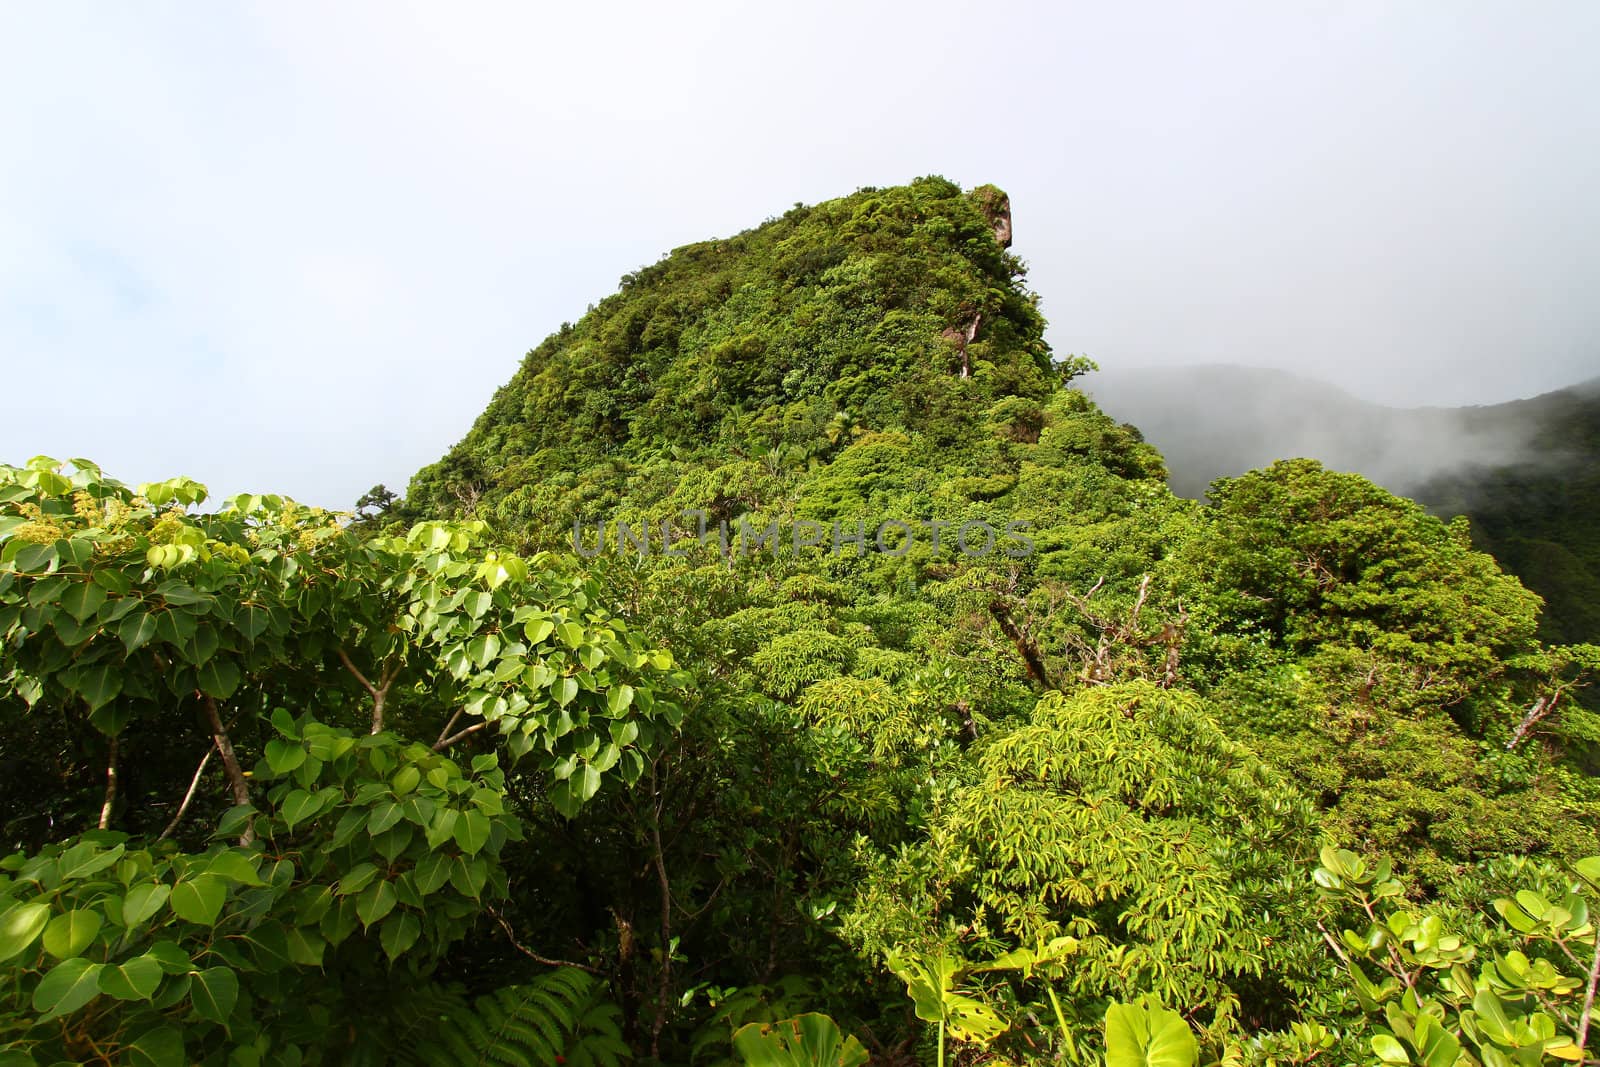 Rainforest of Saint Kitts by Wirepec